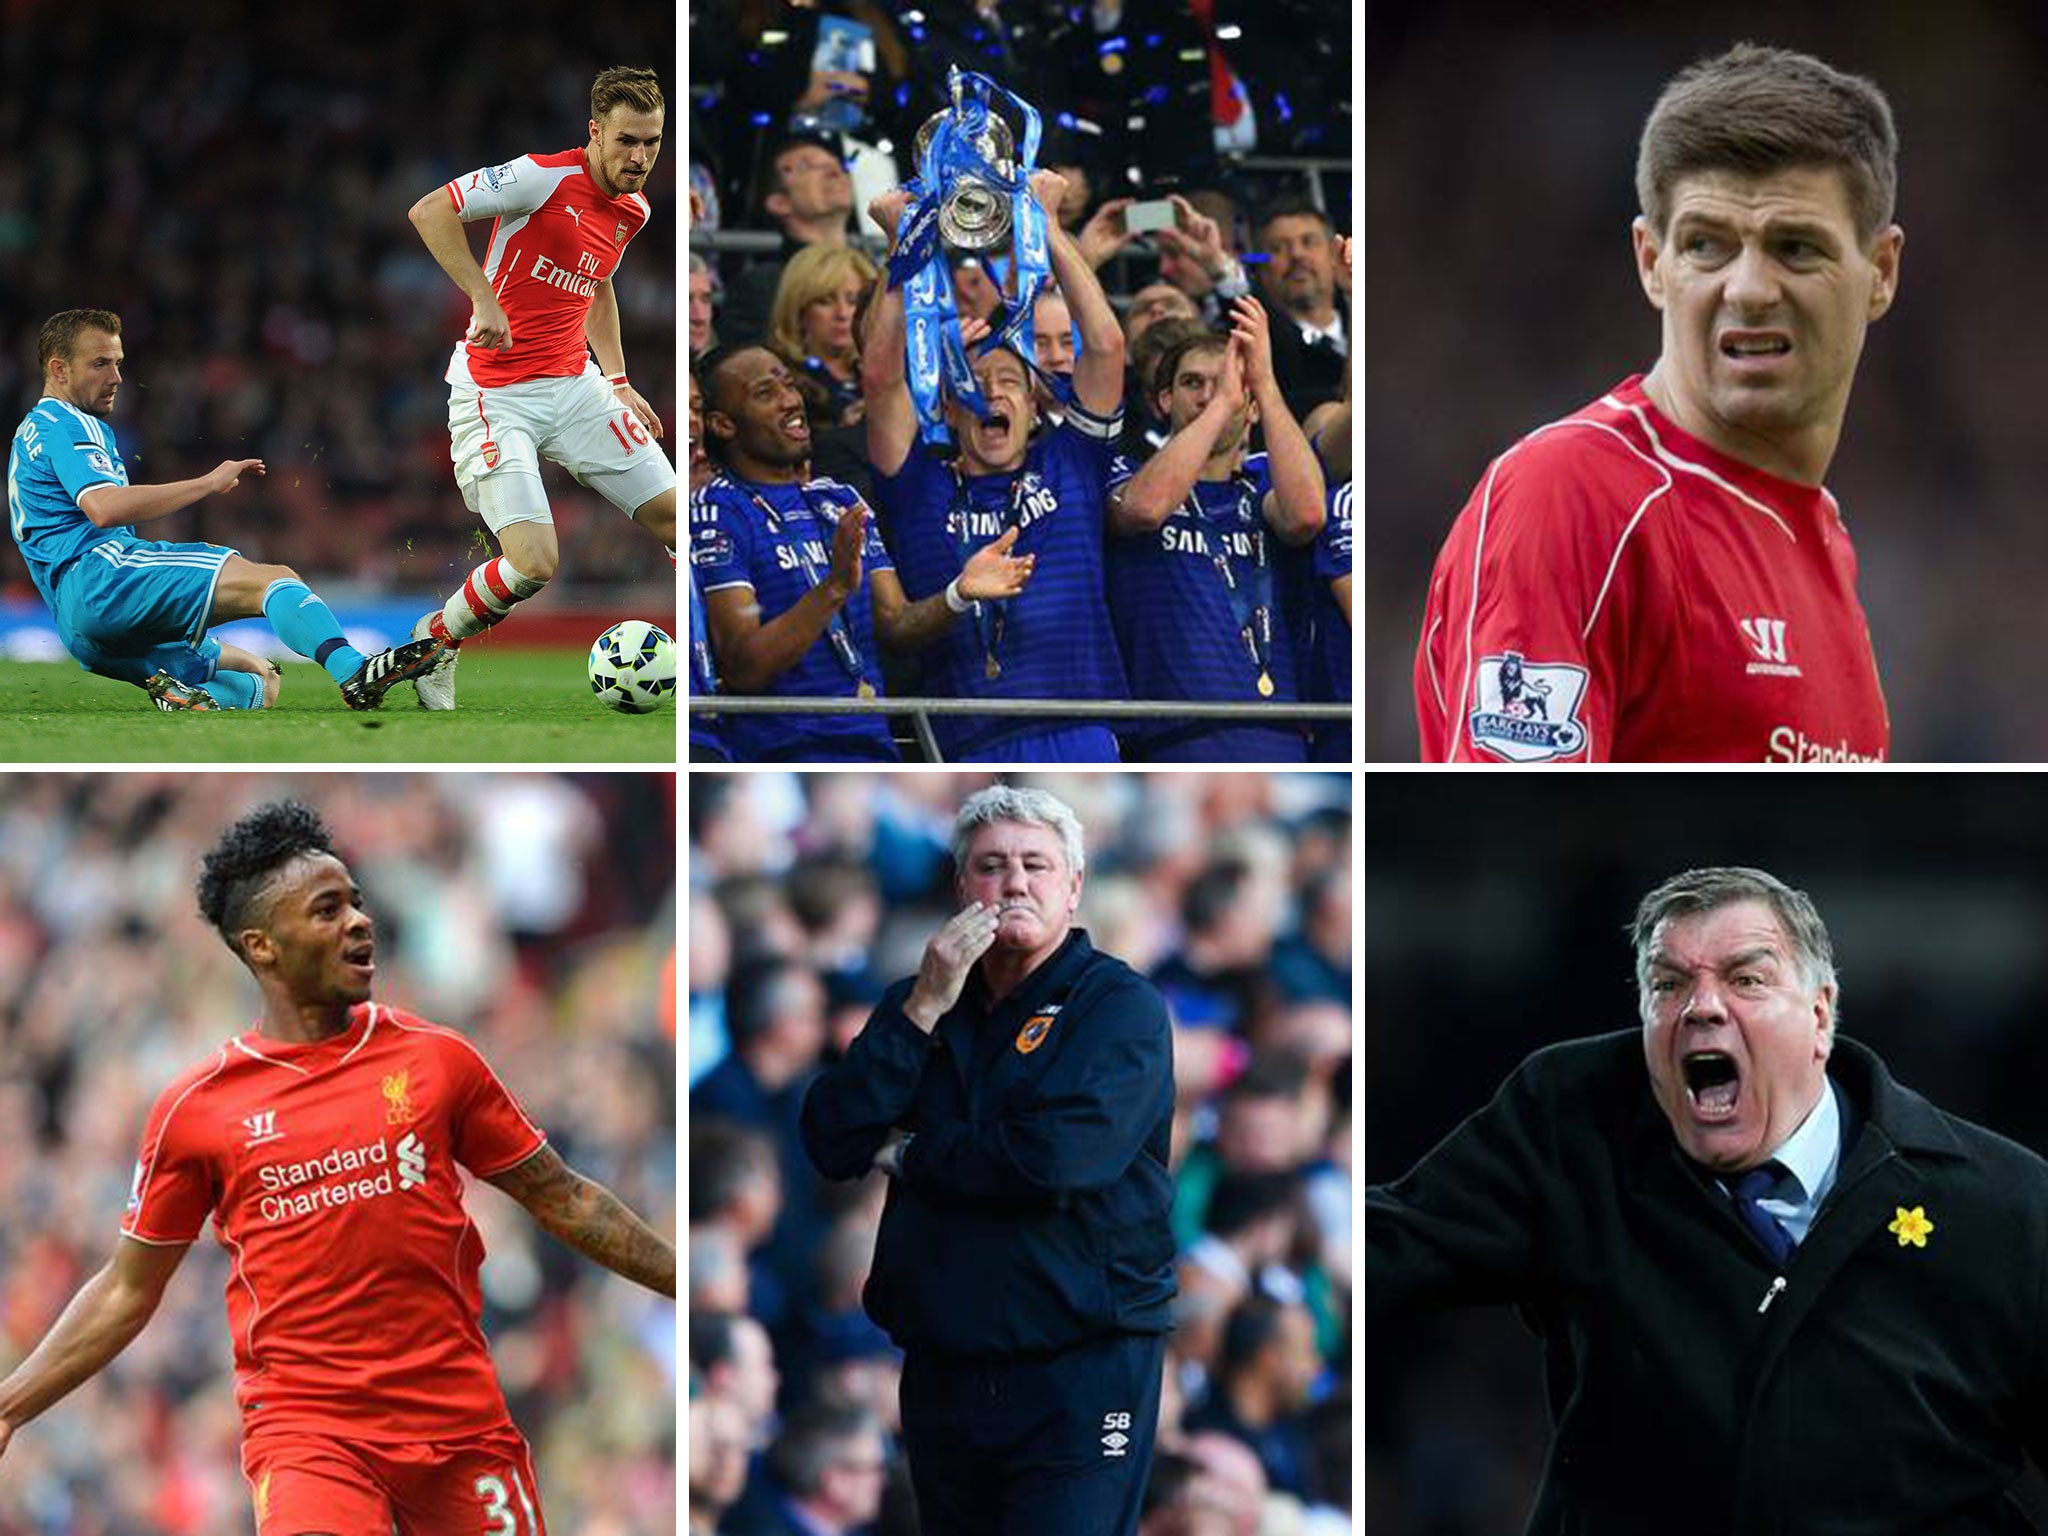 Eight things to look out for this weekend in the Premier League